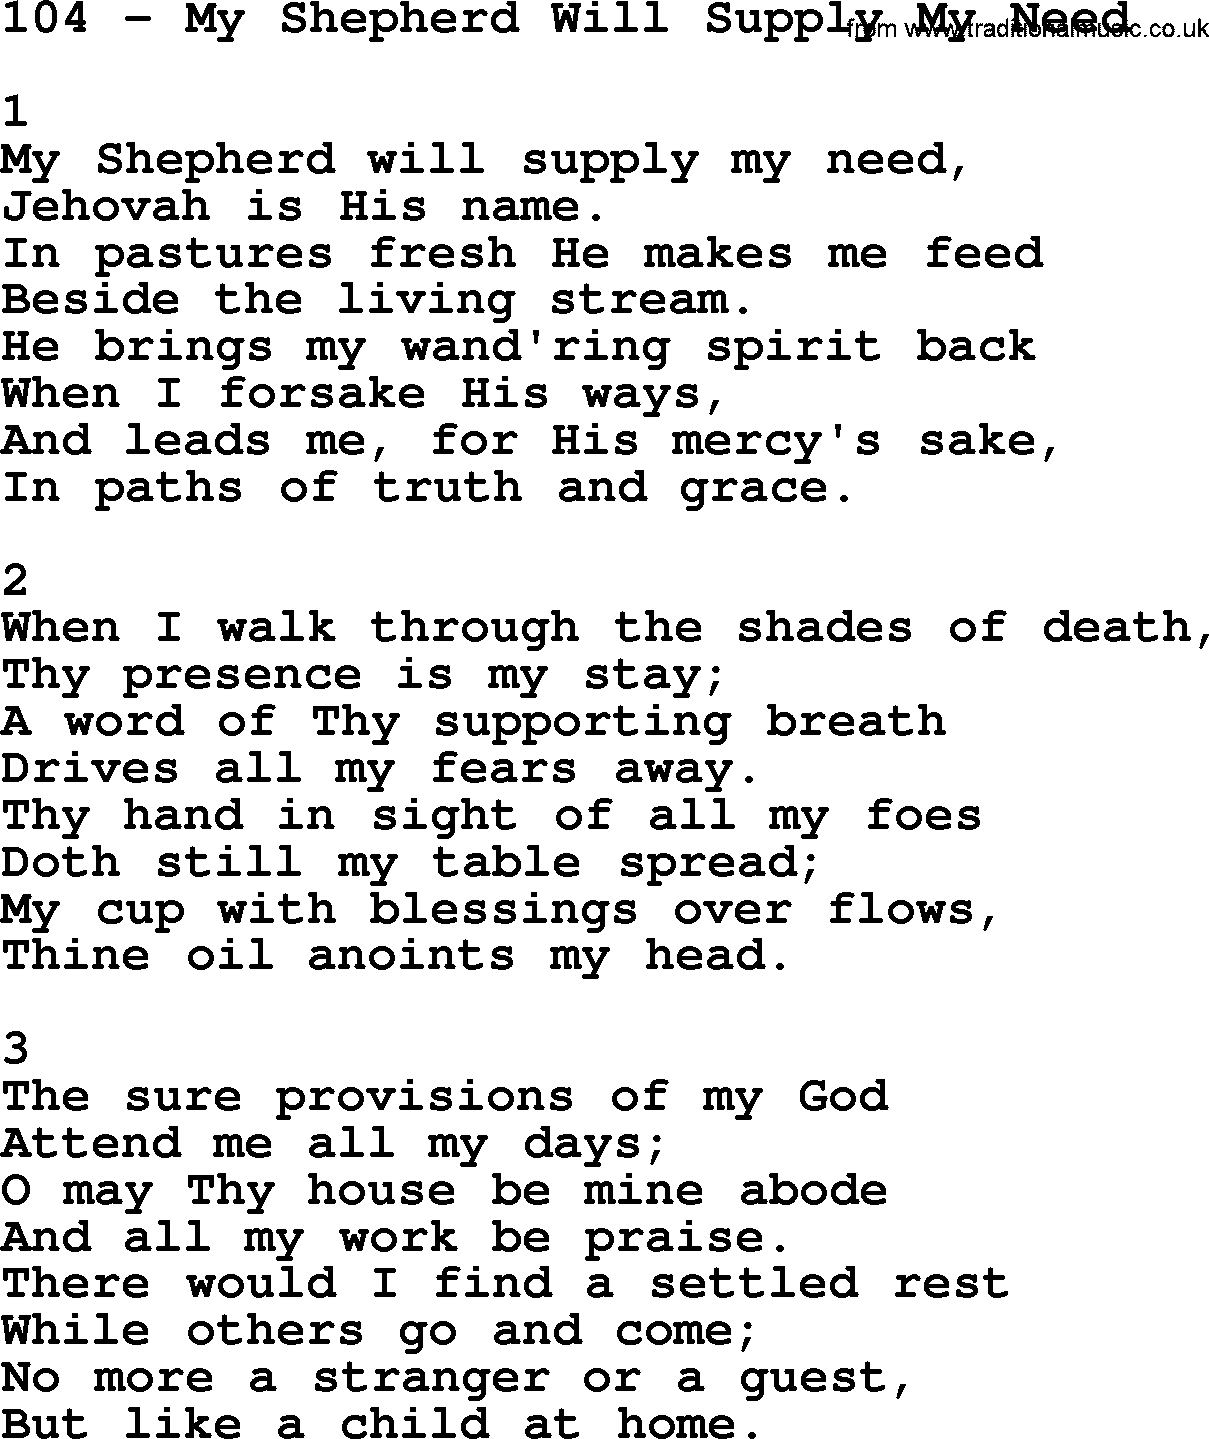 Complete Adventis Hymnal, title: 104-My Shepherd Will Supply My Need, with lyrics, midi, mp3, powerpoints(PPT) and PDF,